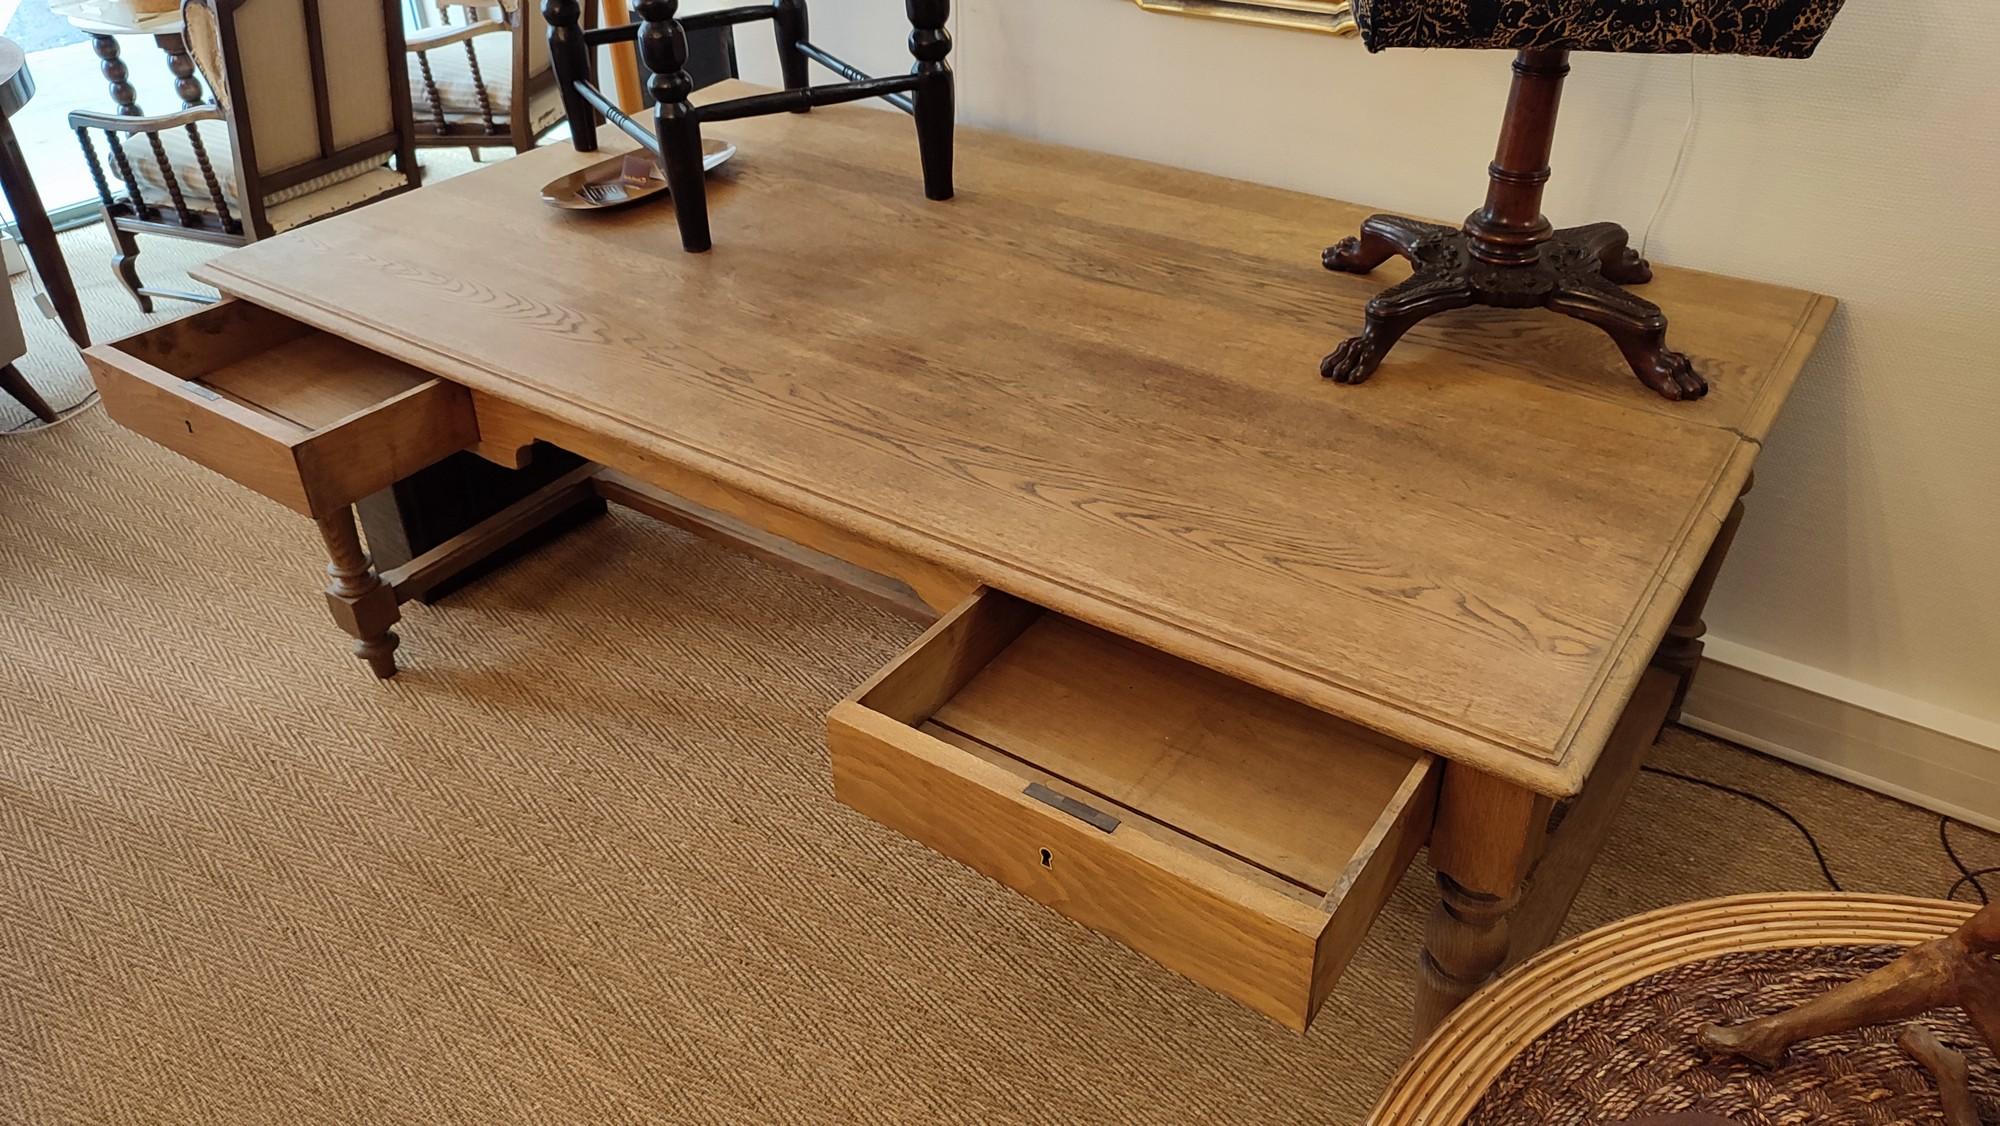 This large oak desk has a real neoclassical look, because of its proportions. The lenghth and width offer a lot of surface, allowing you to put all your work. It has 2 drawers (keys are missing).
It has been stripped, giving it a brutalist vibe,